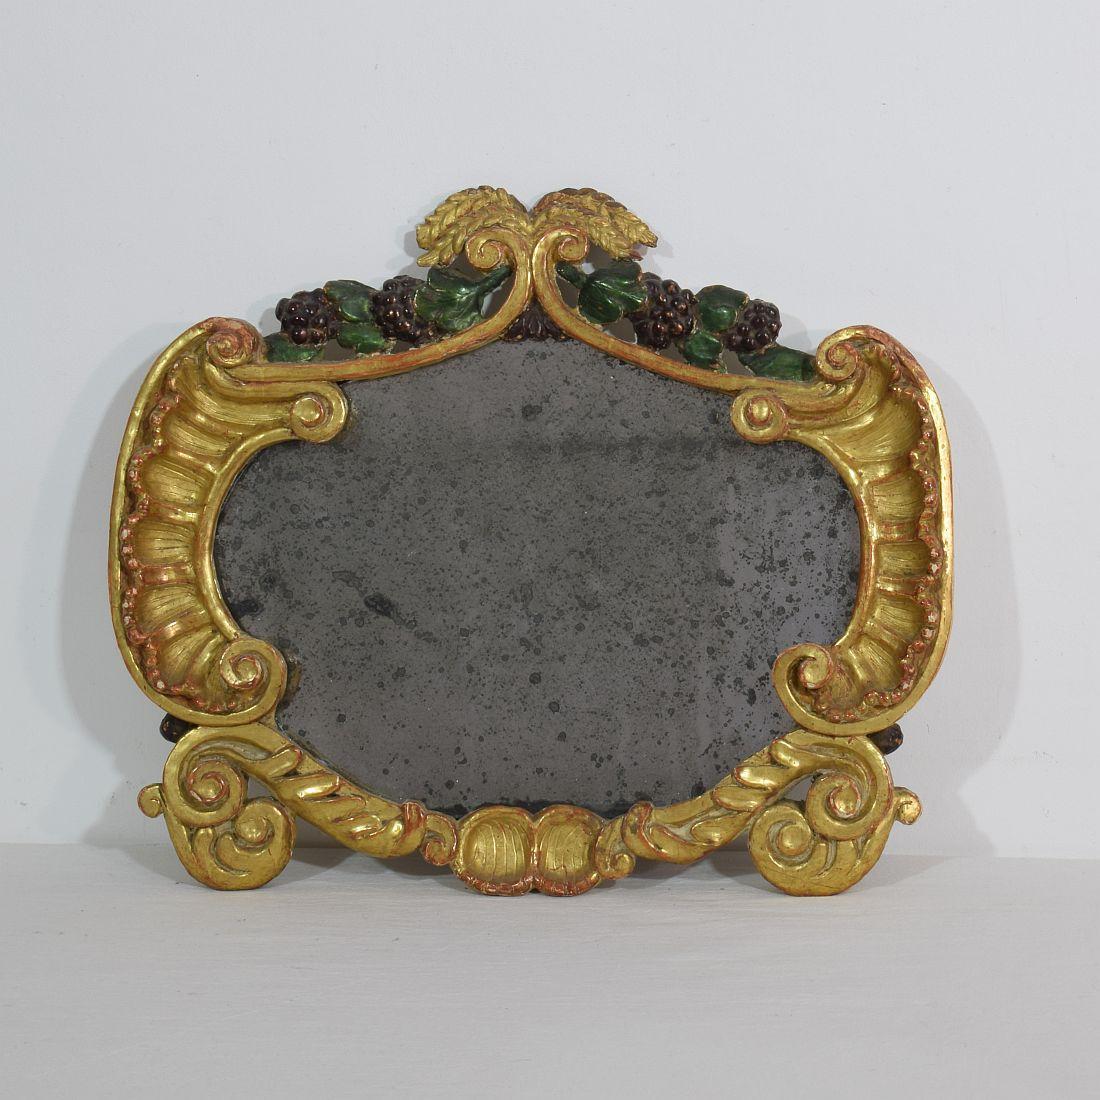 Beautiful carved giltwood Baroque mirror, with its original foxed mirror glass.
Italy, circa 1750. Weathered and minor losses.